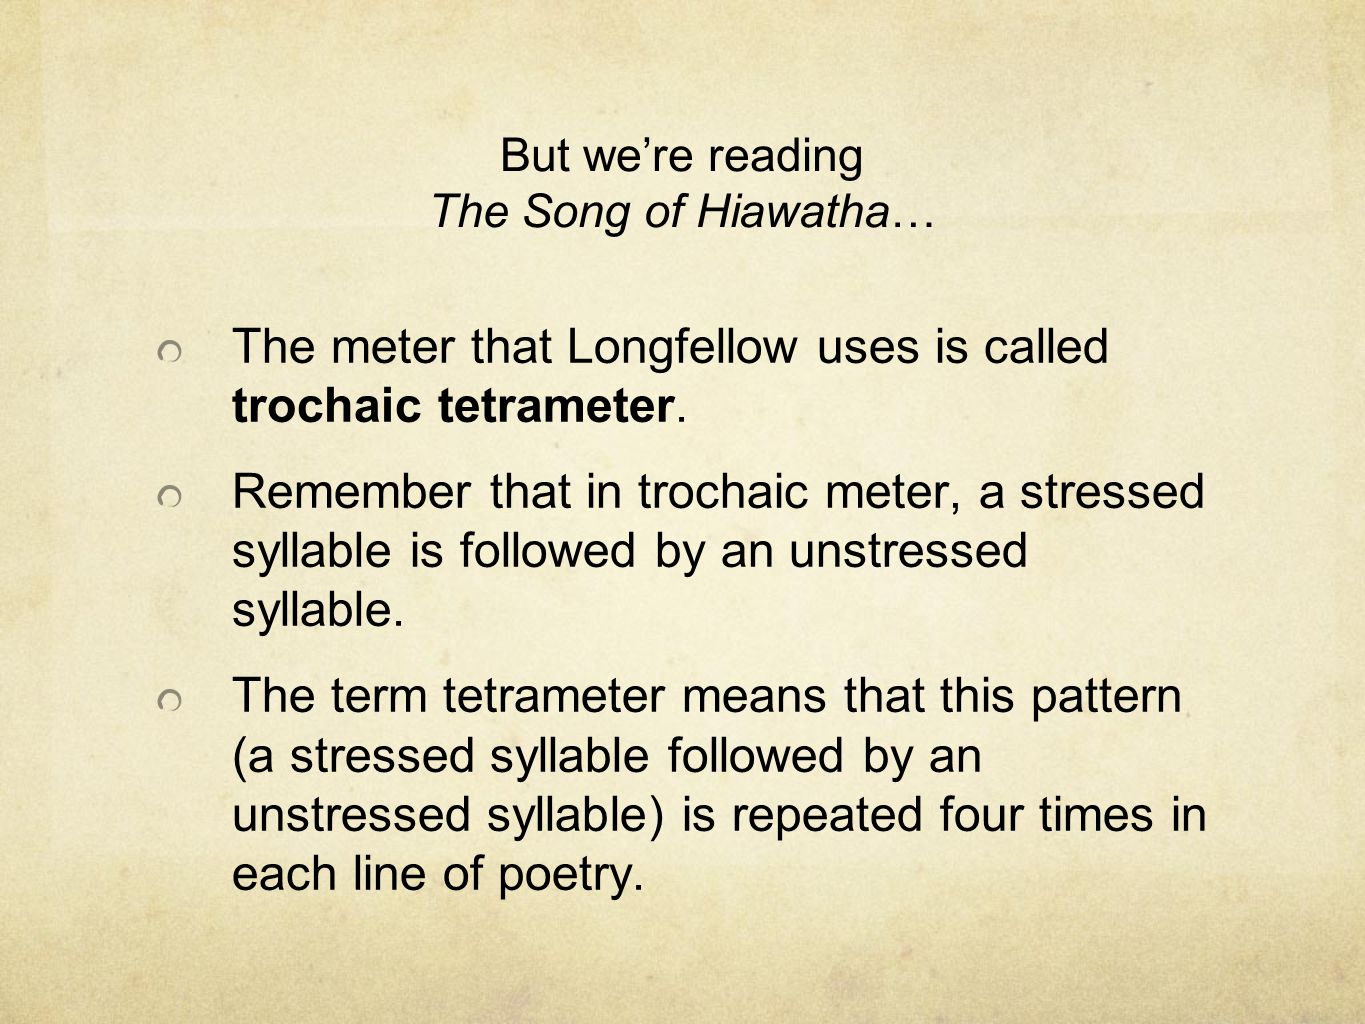 But we’re reading The Song of Hiawatha…